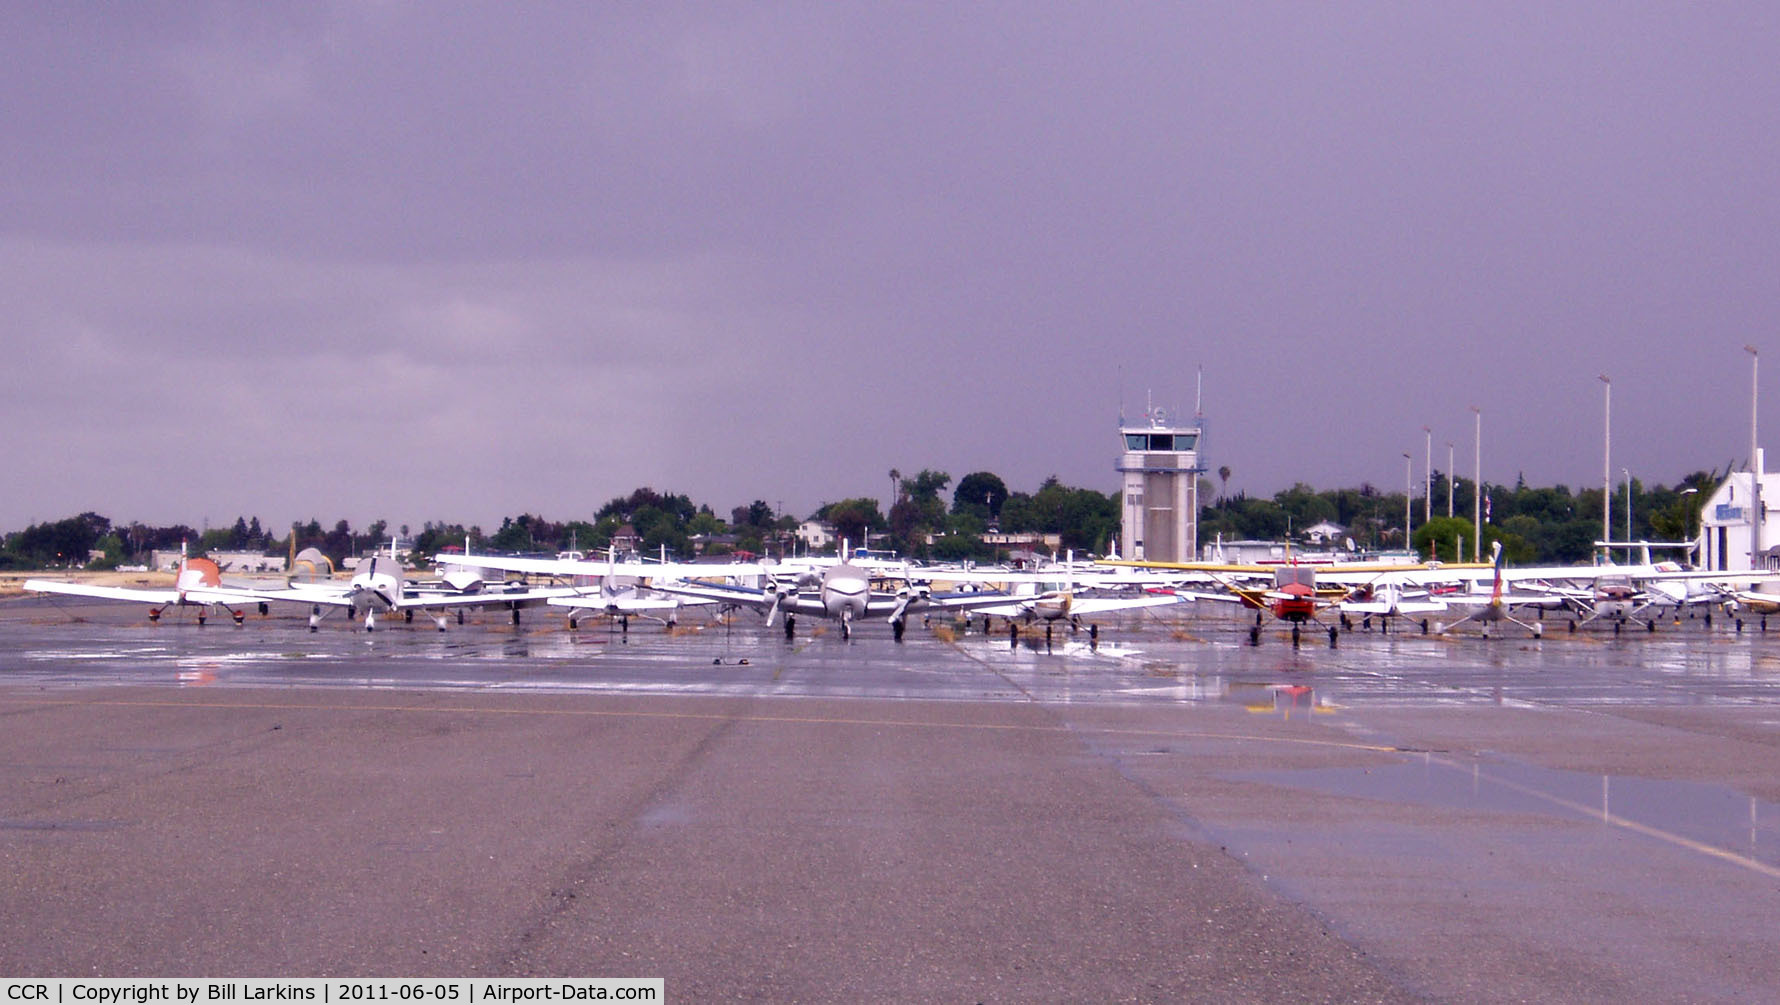 Buchanan Field Airport (CCR) - Central ramp and Tower freshly washed with rain.